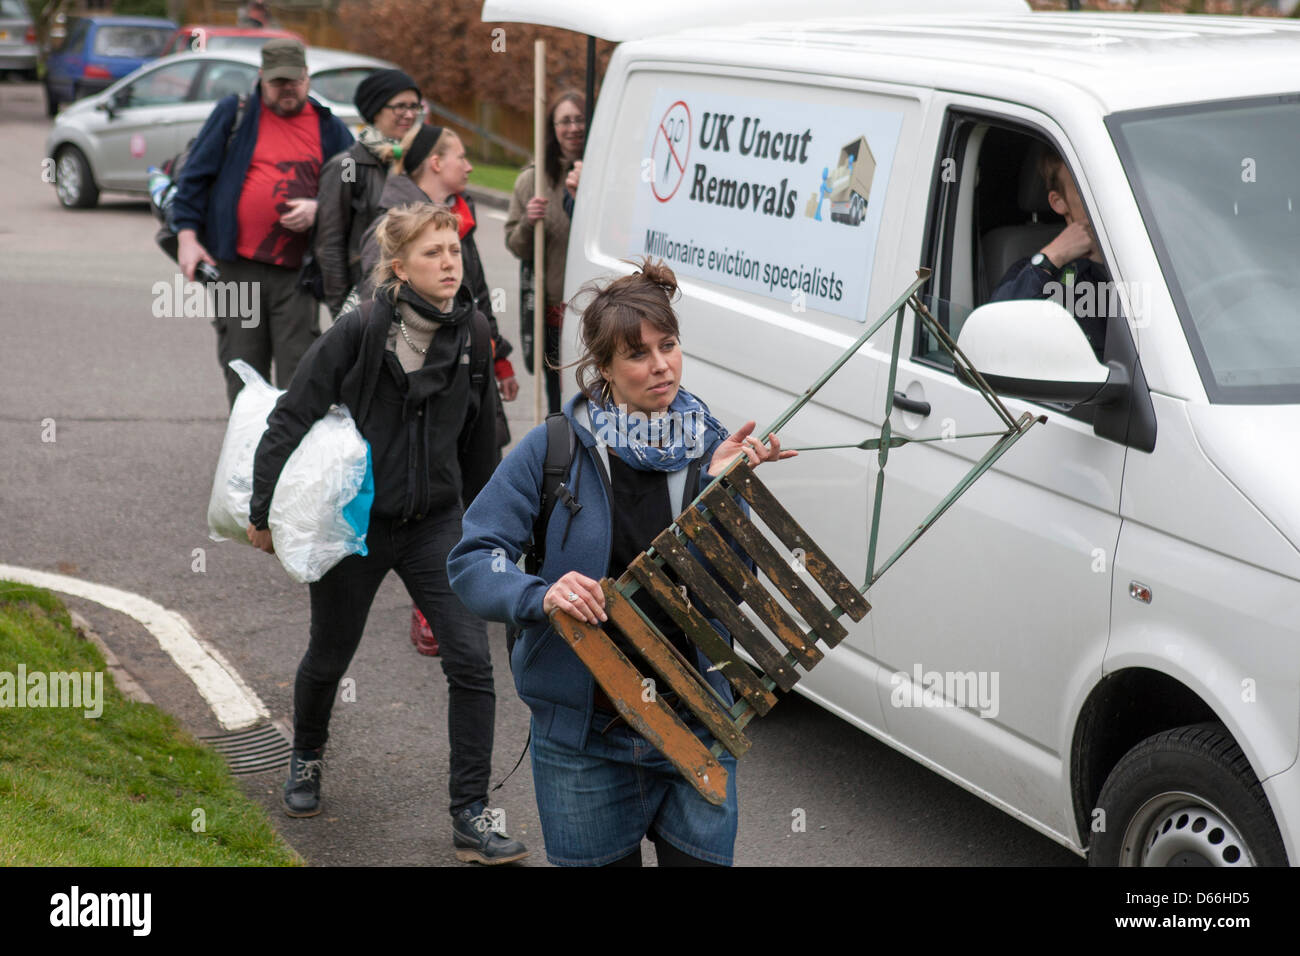 London, UK. 13th April 2013. UK Uncut activists en route to stage 'Who Wants to Evict a Millionaire' event outside the home of Lord Freud, architect of the Welfare Reform Bill. Credit: Martyn Wheatley / Alamy Live News Stock Photo